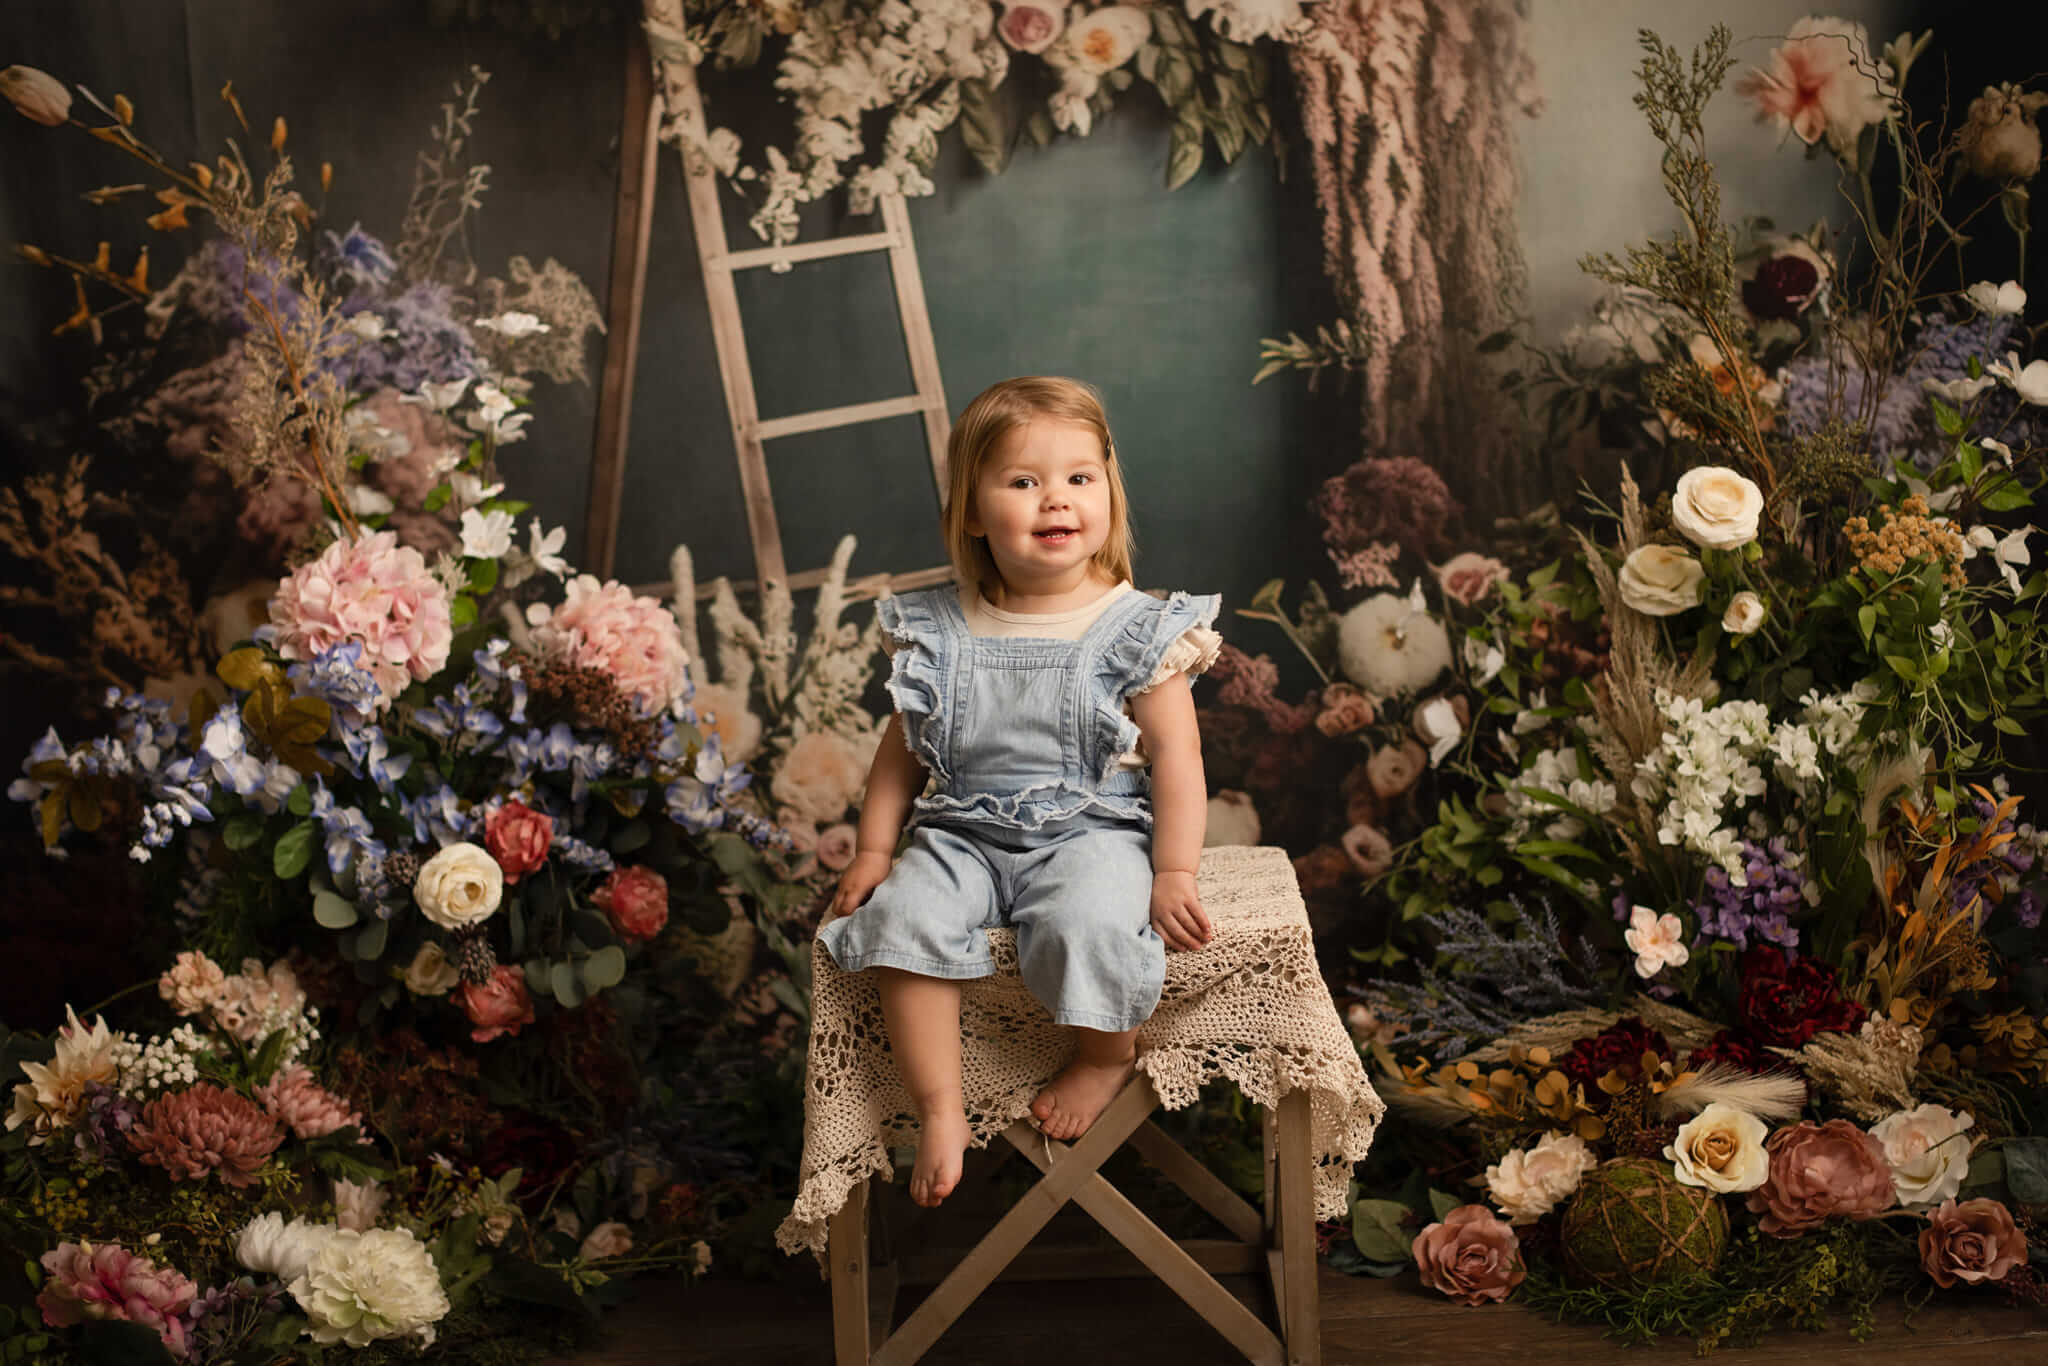 Kate Painterly Fine Art Floral Interior Room with Dried Flowers Backdrop Designed by Mini MakeBelieve